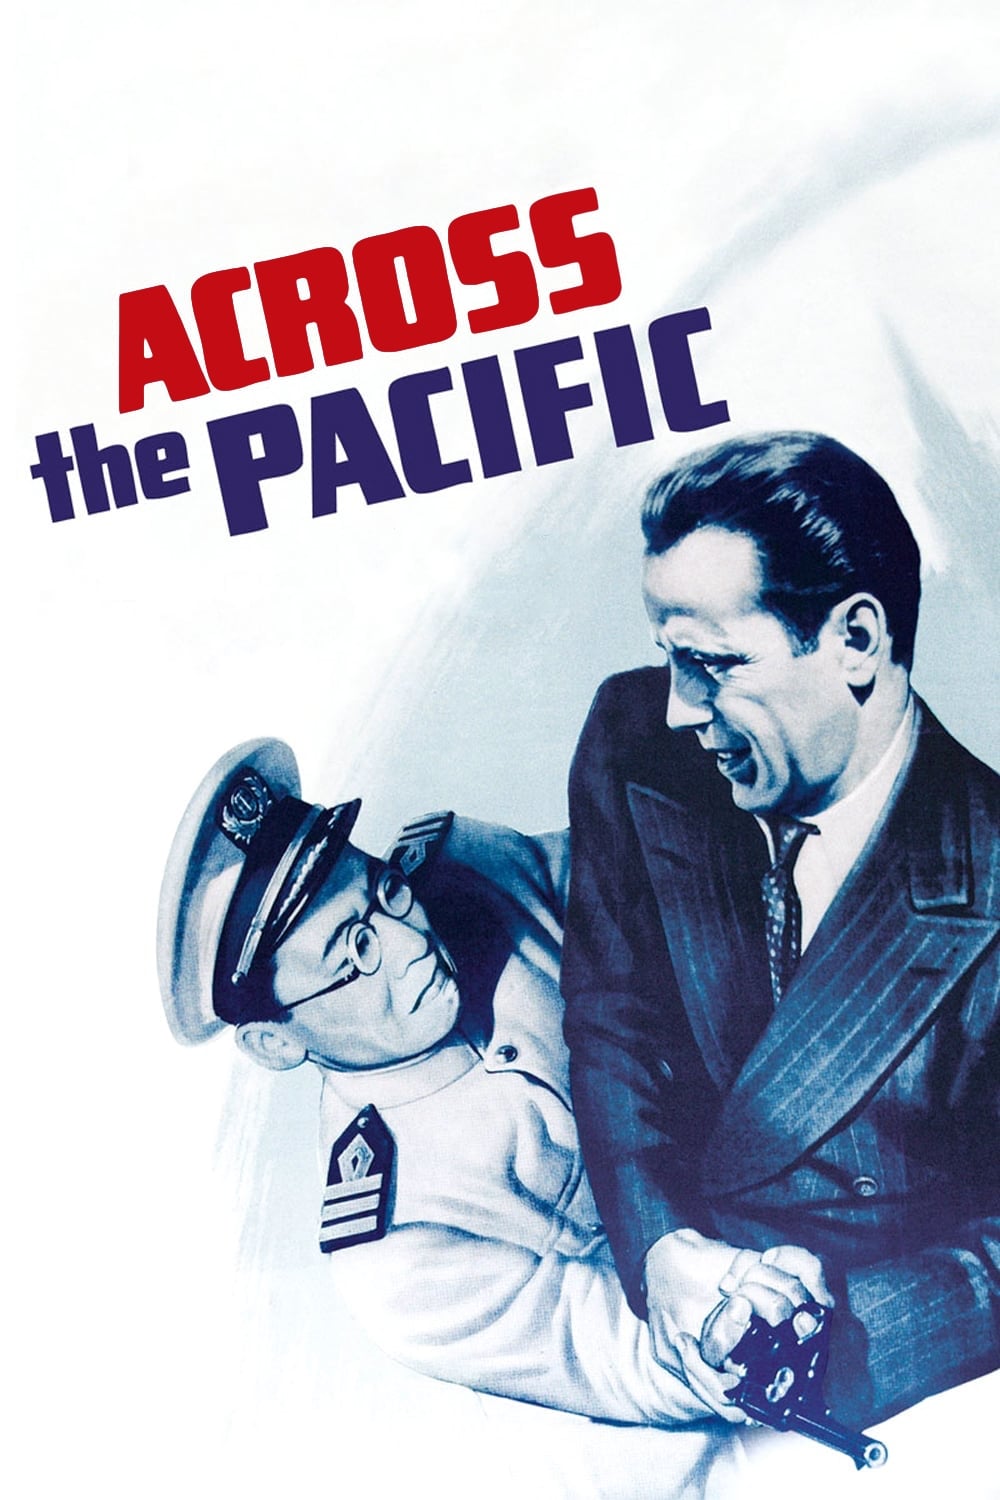 Across the Pacific (1942)